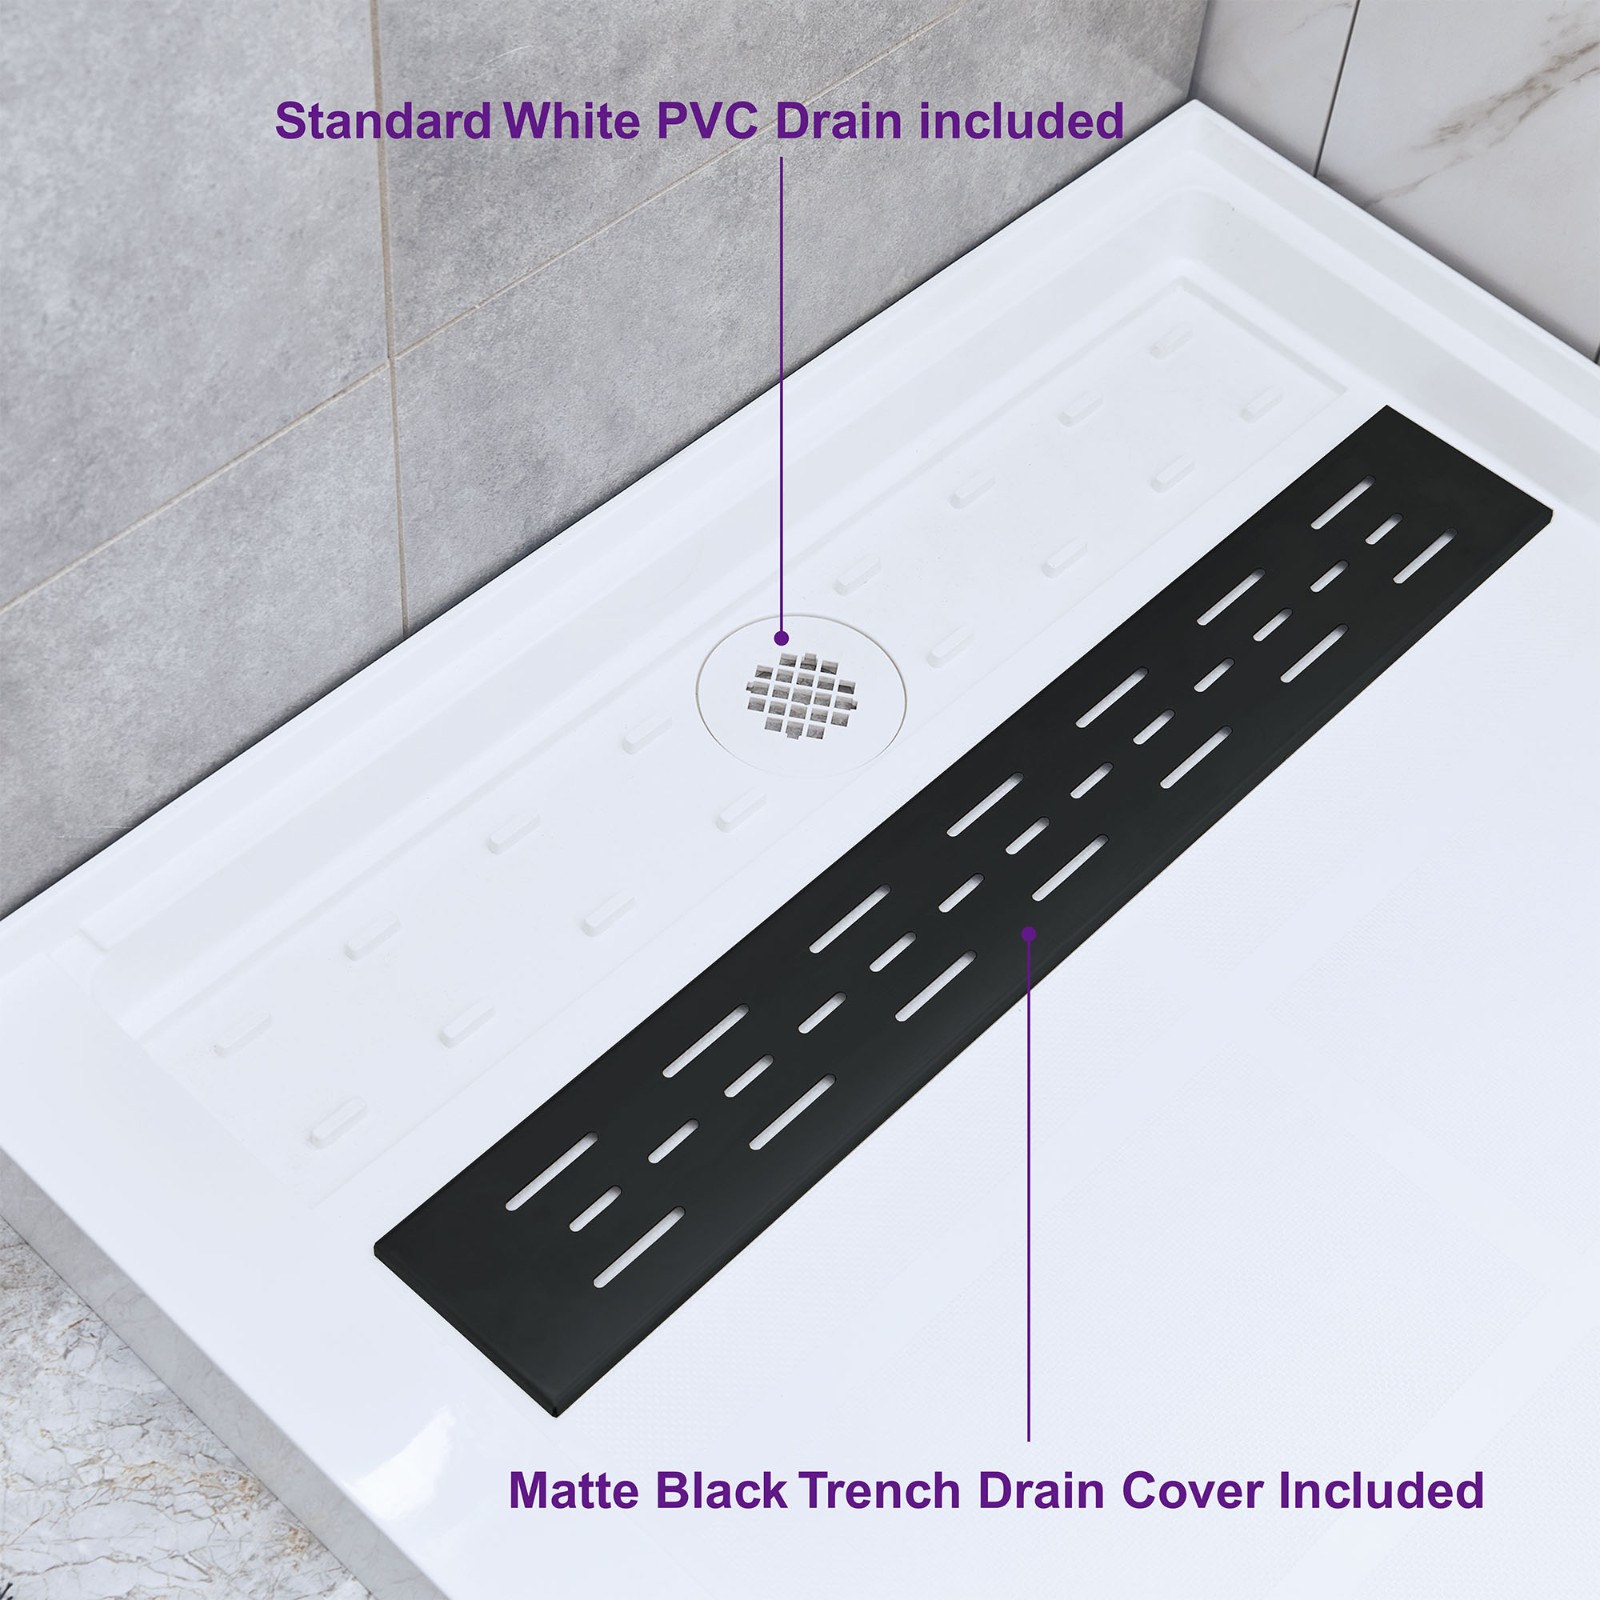  WOODBRIDGE SBR6034-1000R-MB SolidSurface Shower Base with Recessed Trench Side Including Matte Black Linear Cover, 60